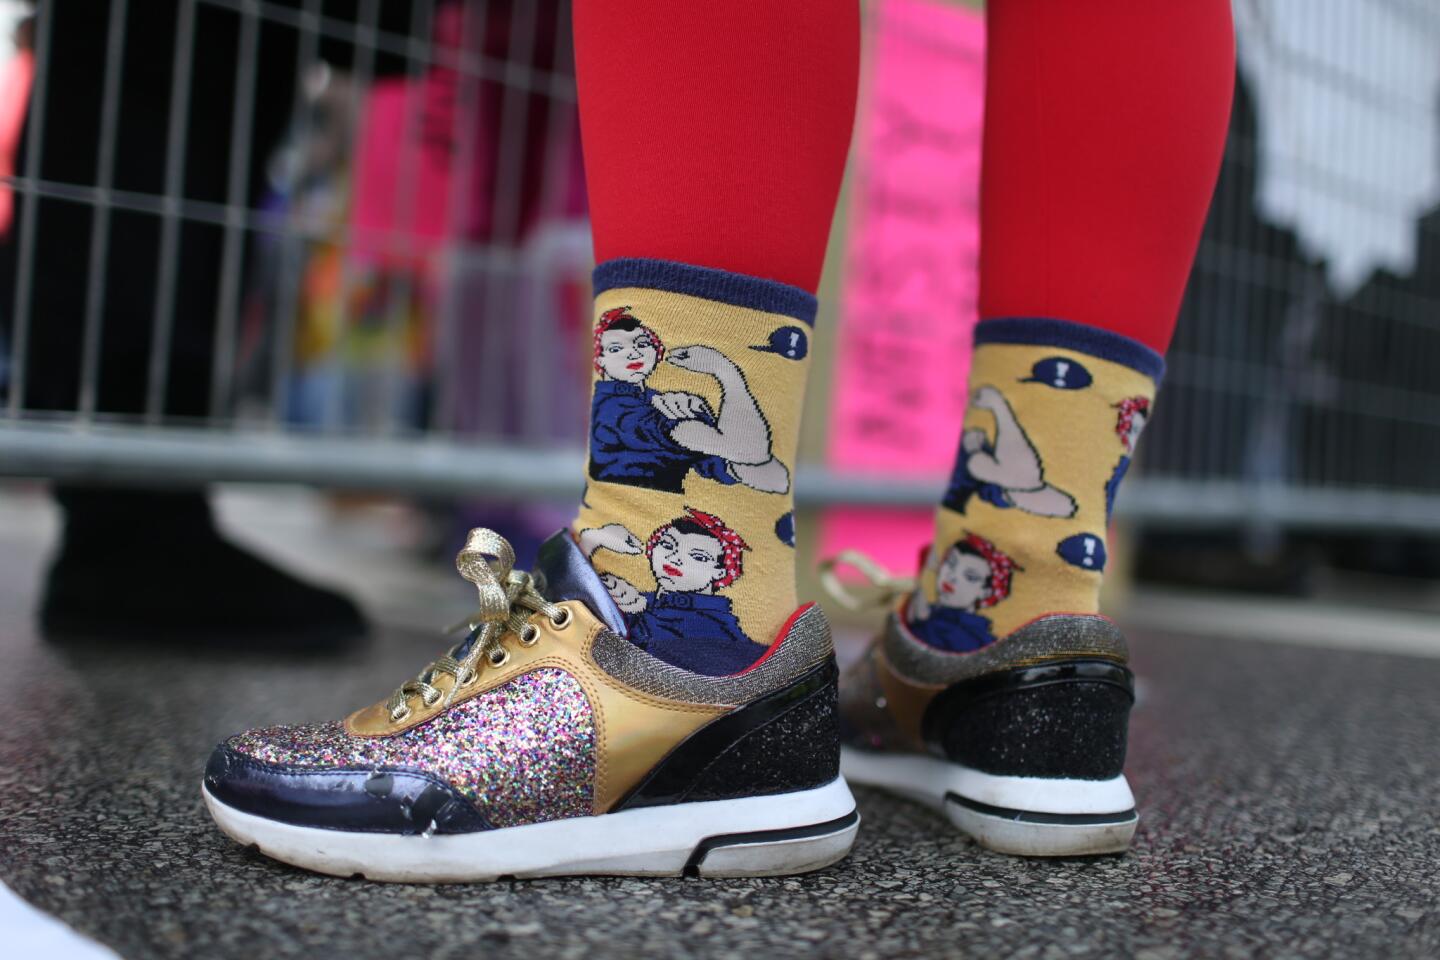 Corielle Laaspere wears socks decorated with images of World War II-era cultural icon Rosie the Riveter at the Women's March on Chicago on Jan. 21, 2017.